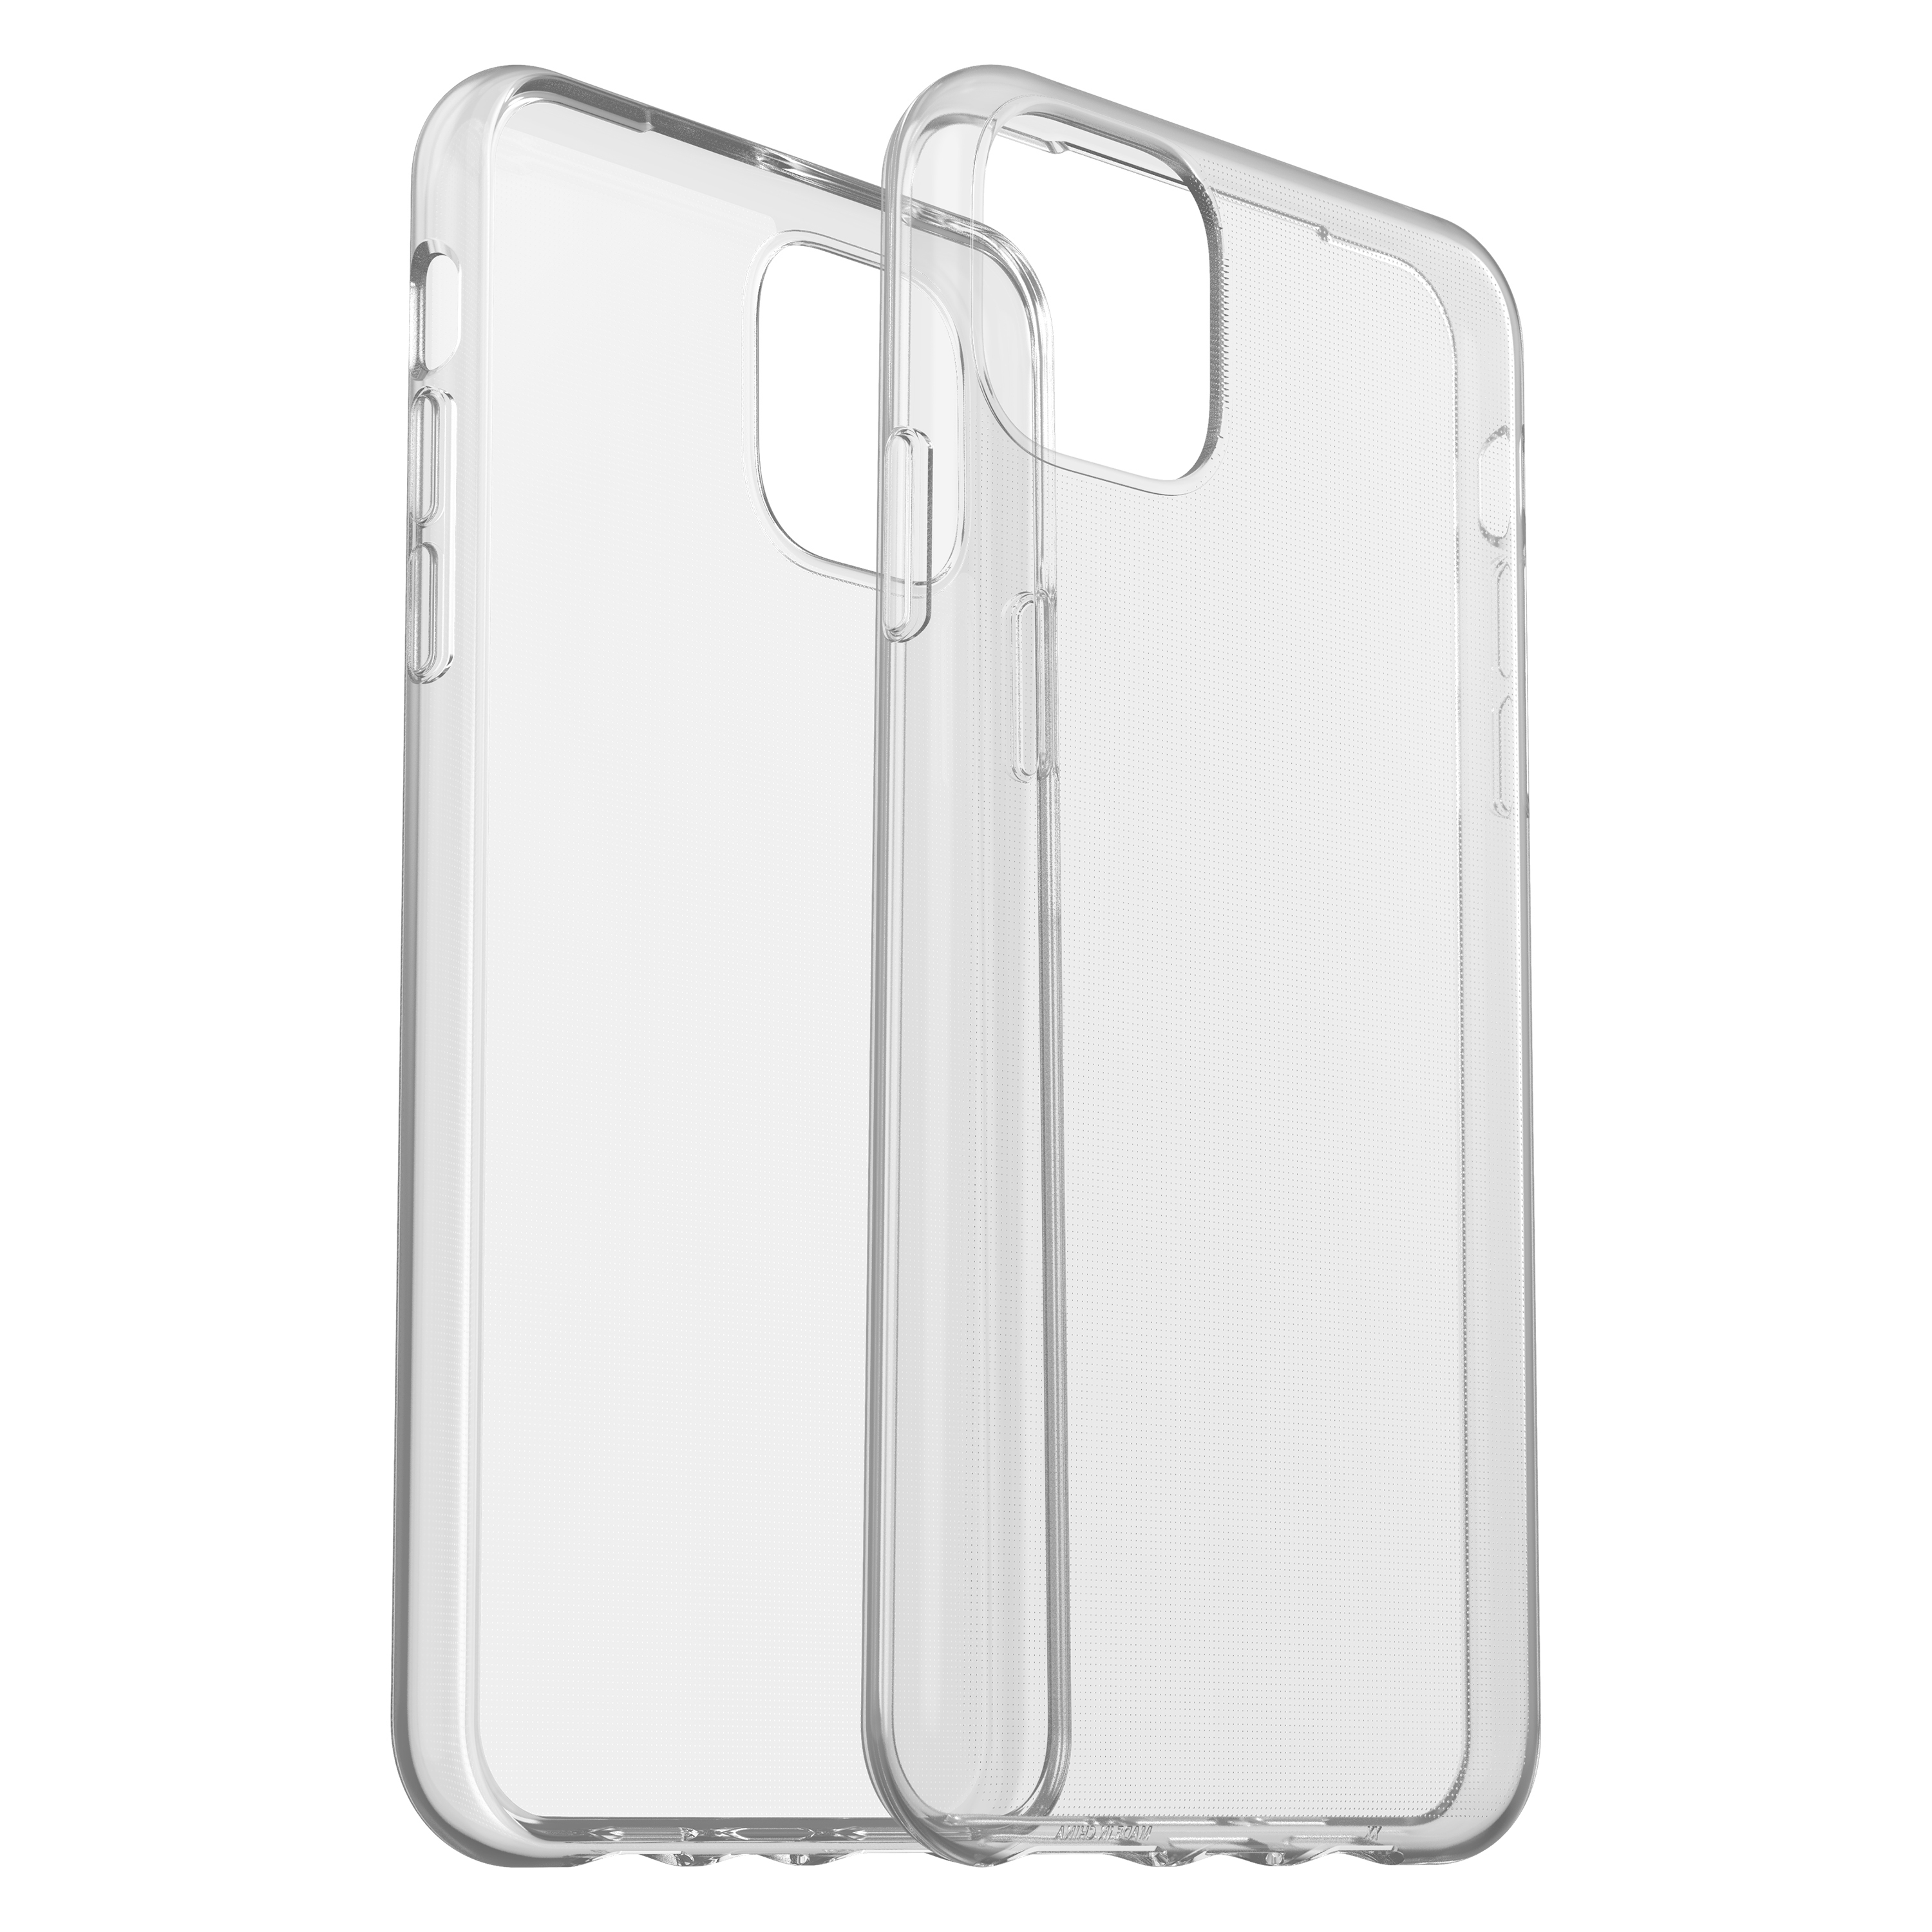 Skin, Transparent OTTERBOX Pro Backcover, Clearly 11 iPhone Max, Protected Apple,